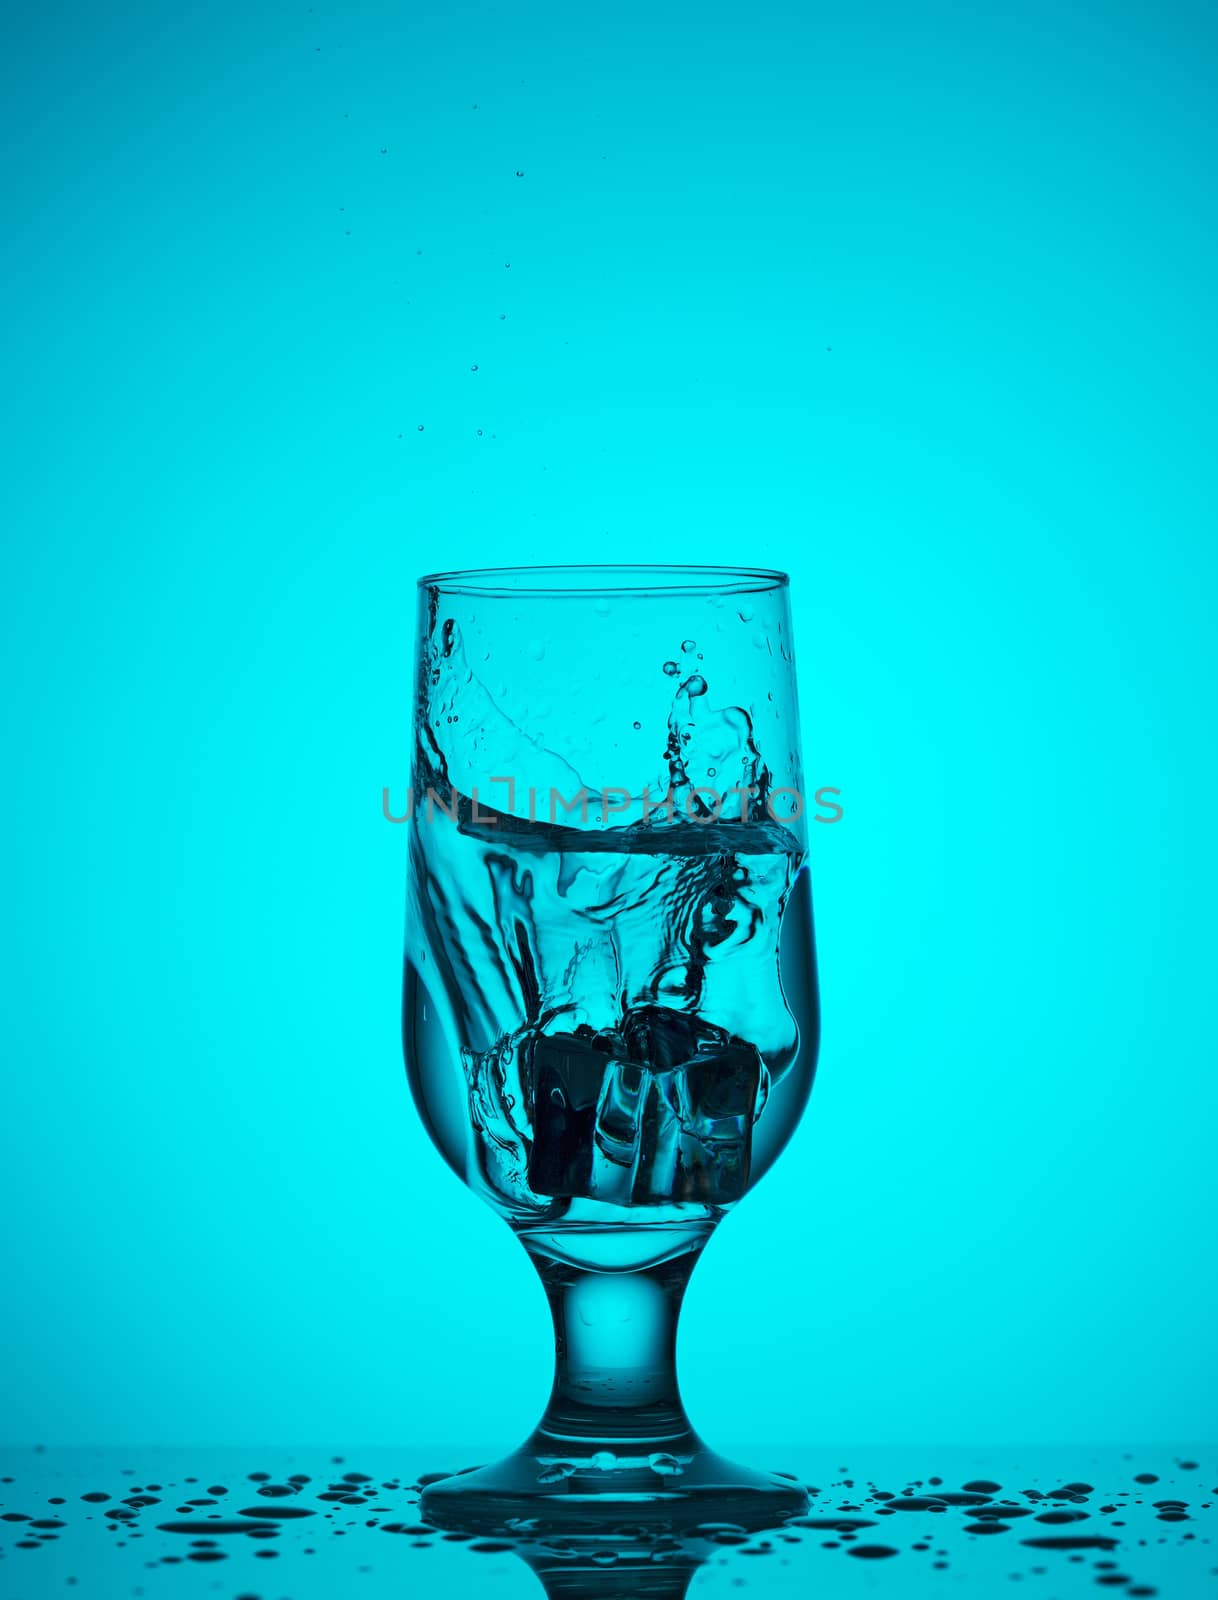 An ice cube falls into a glass glass with water by Sergii